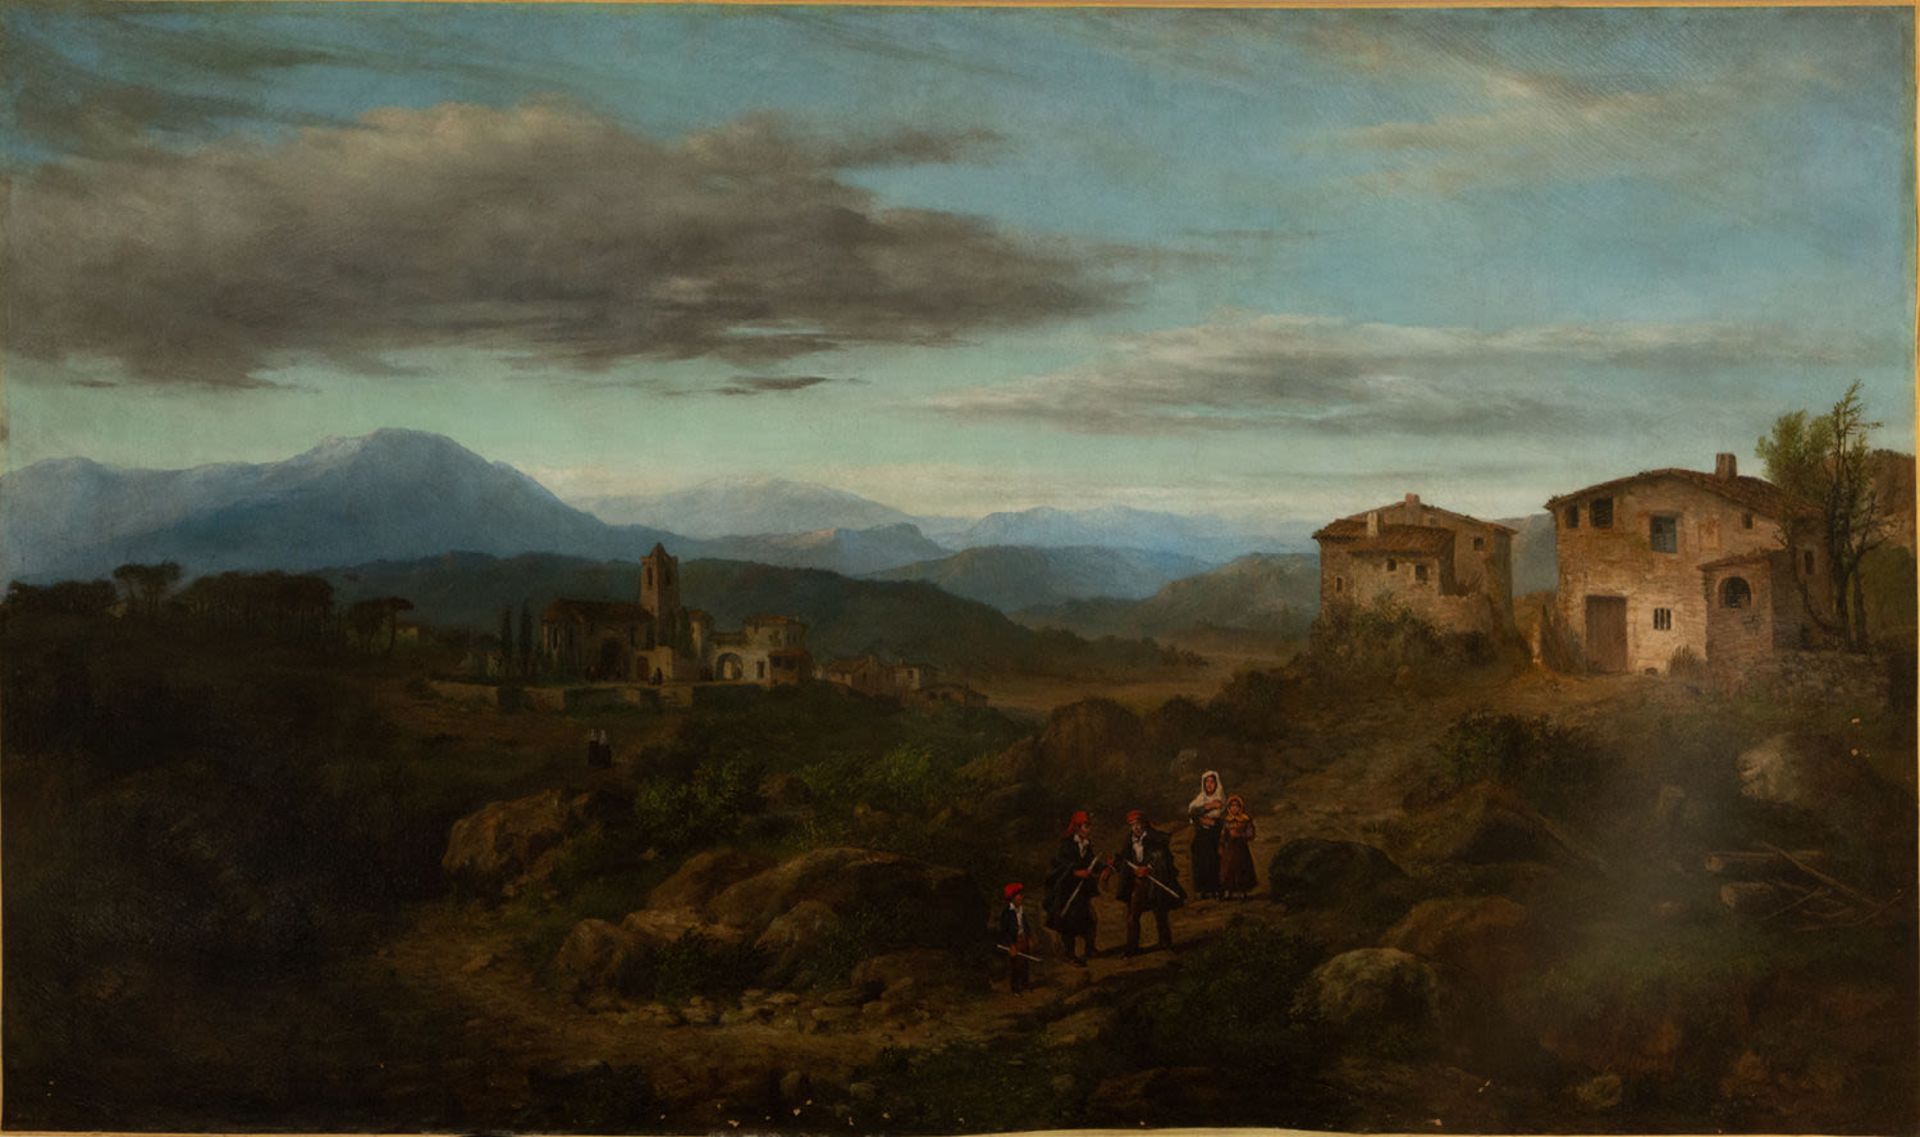 Great Landscape with Catalan farmhouse, Catalan school of the 19th century